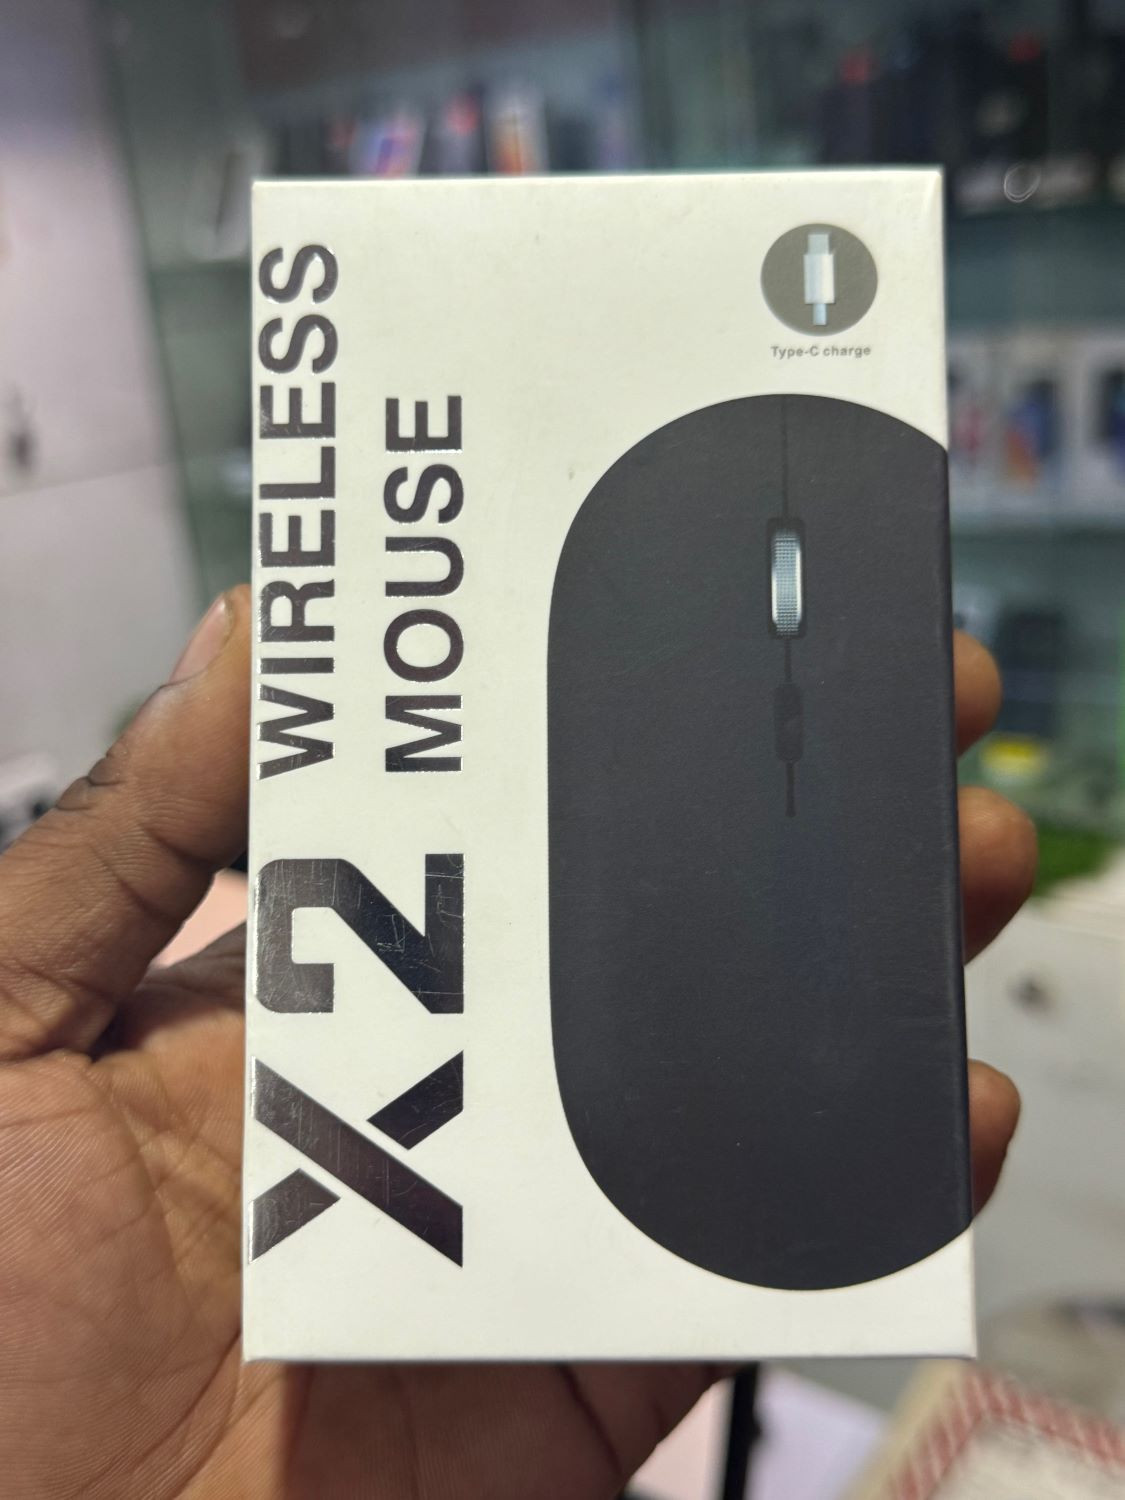 X2 Wireless Mouse